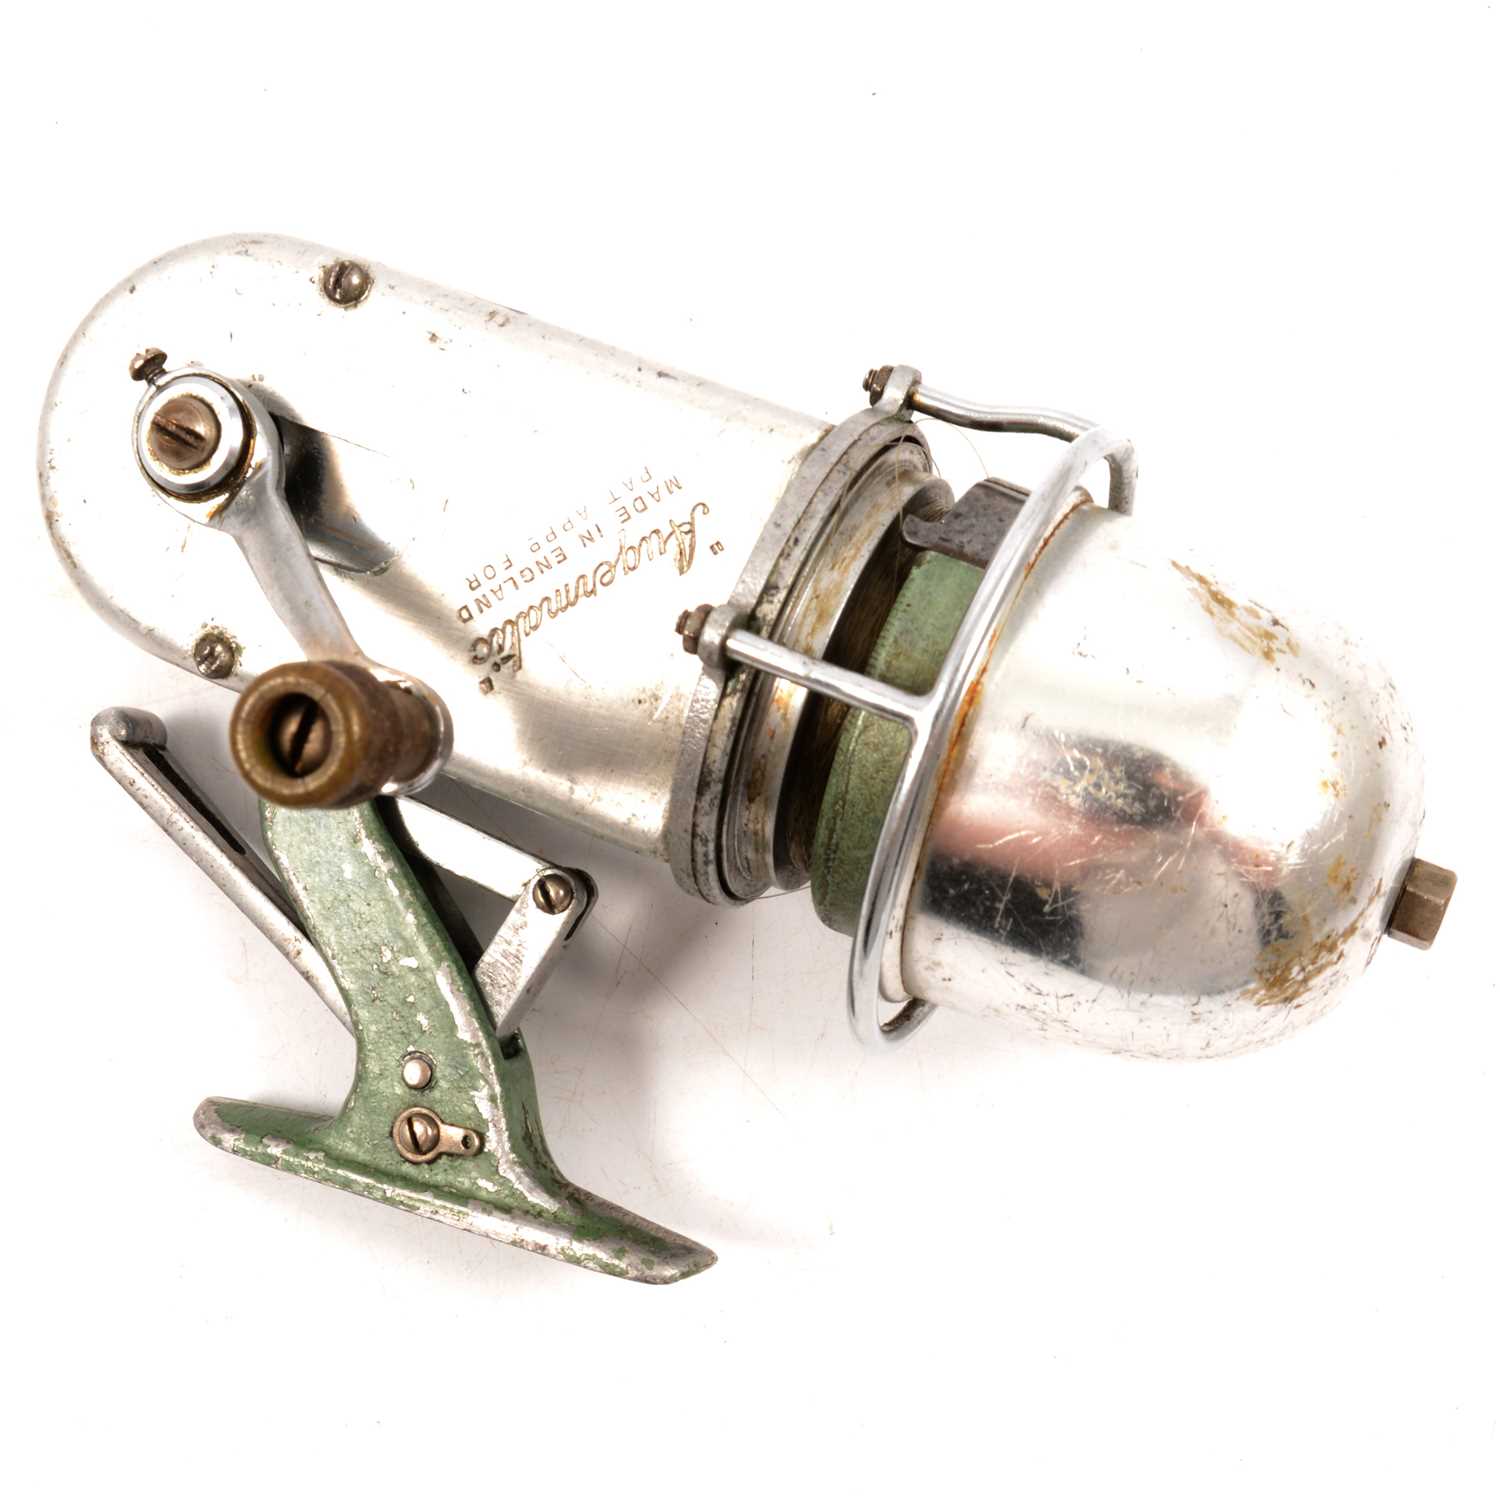 Lot 231 - Early 'Augermatic' trigger action spinning